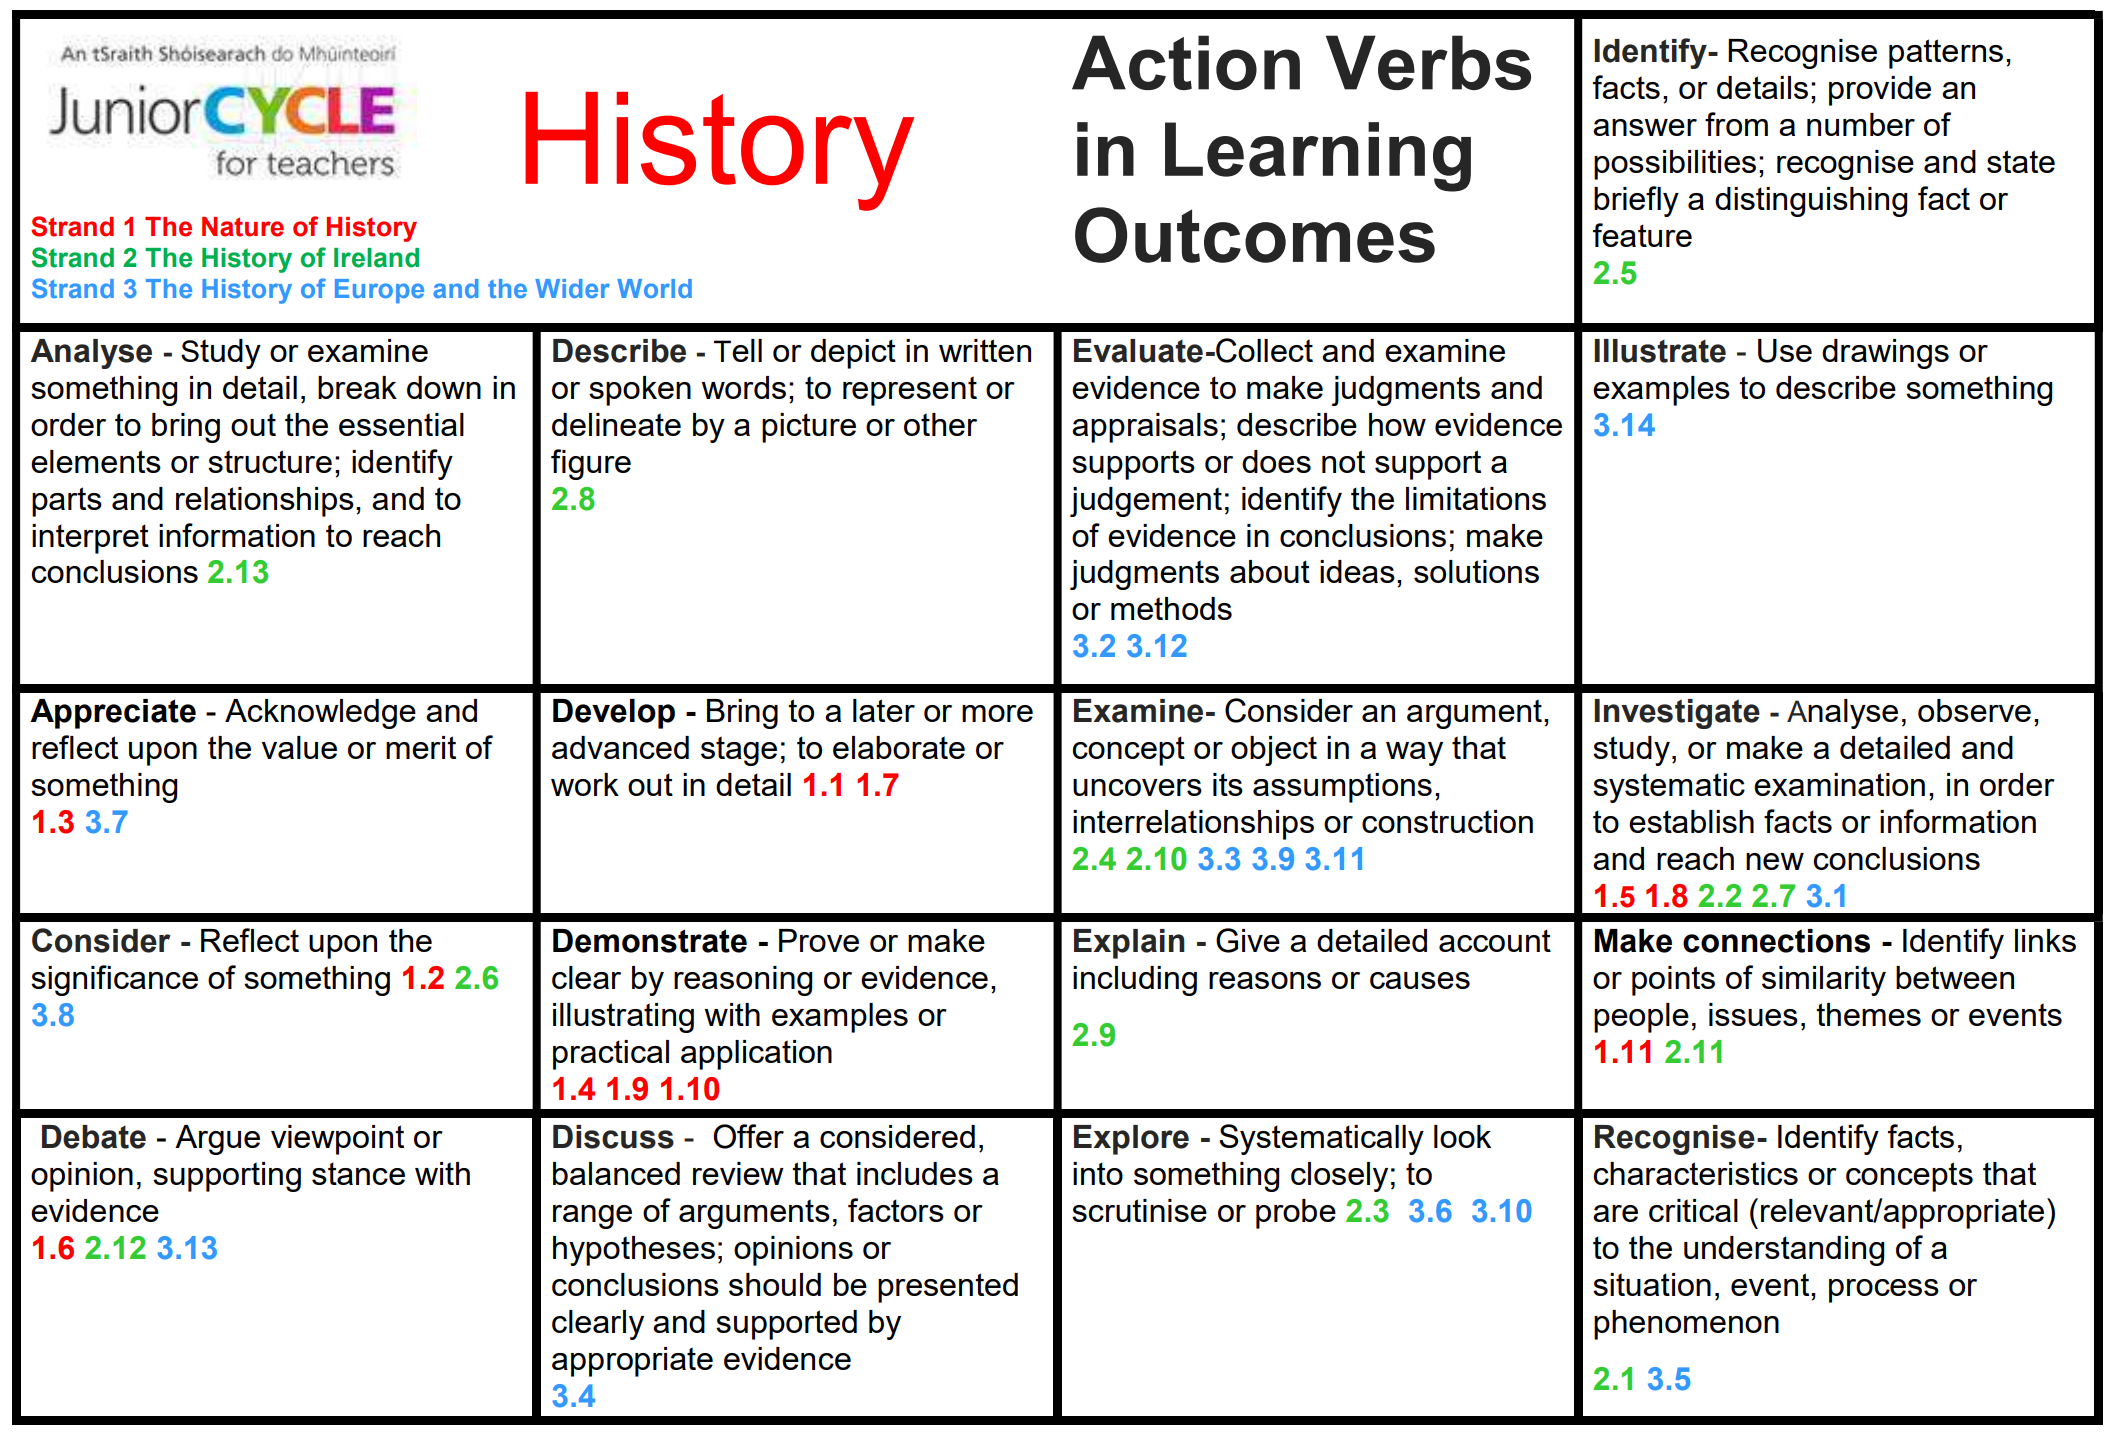 Action Verbs in Learning Outcomes.pdf